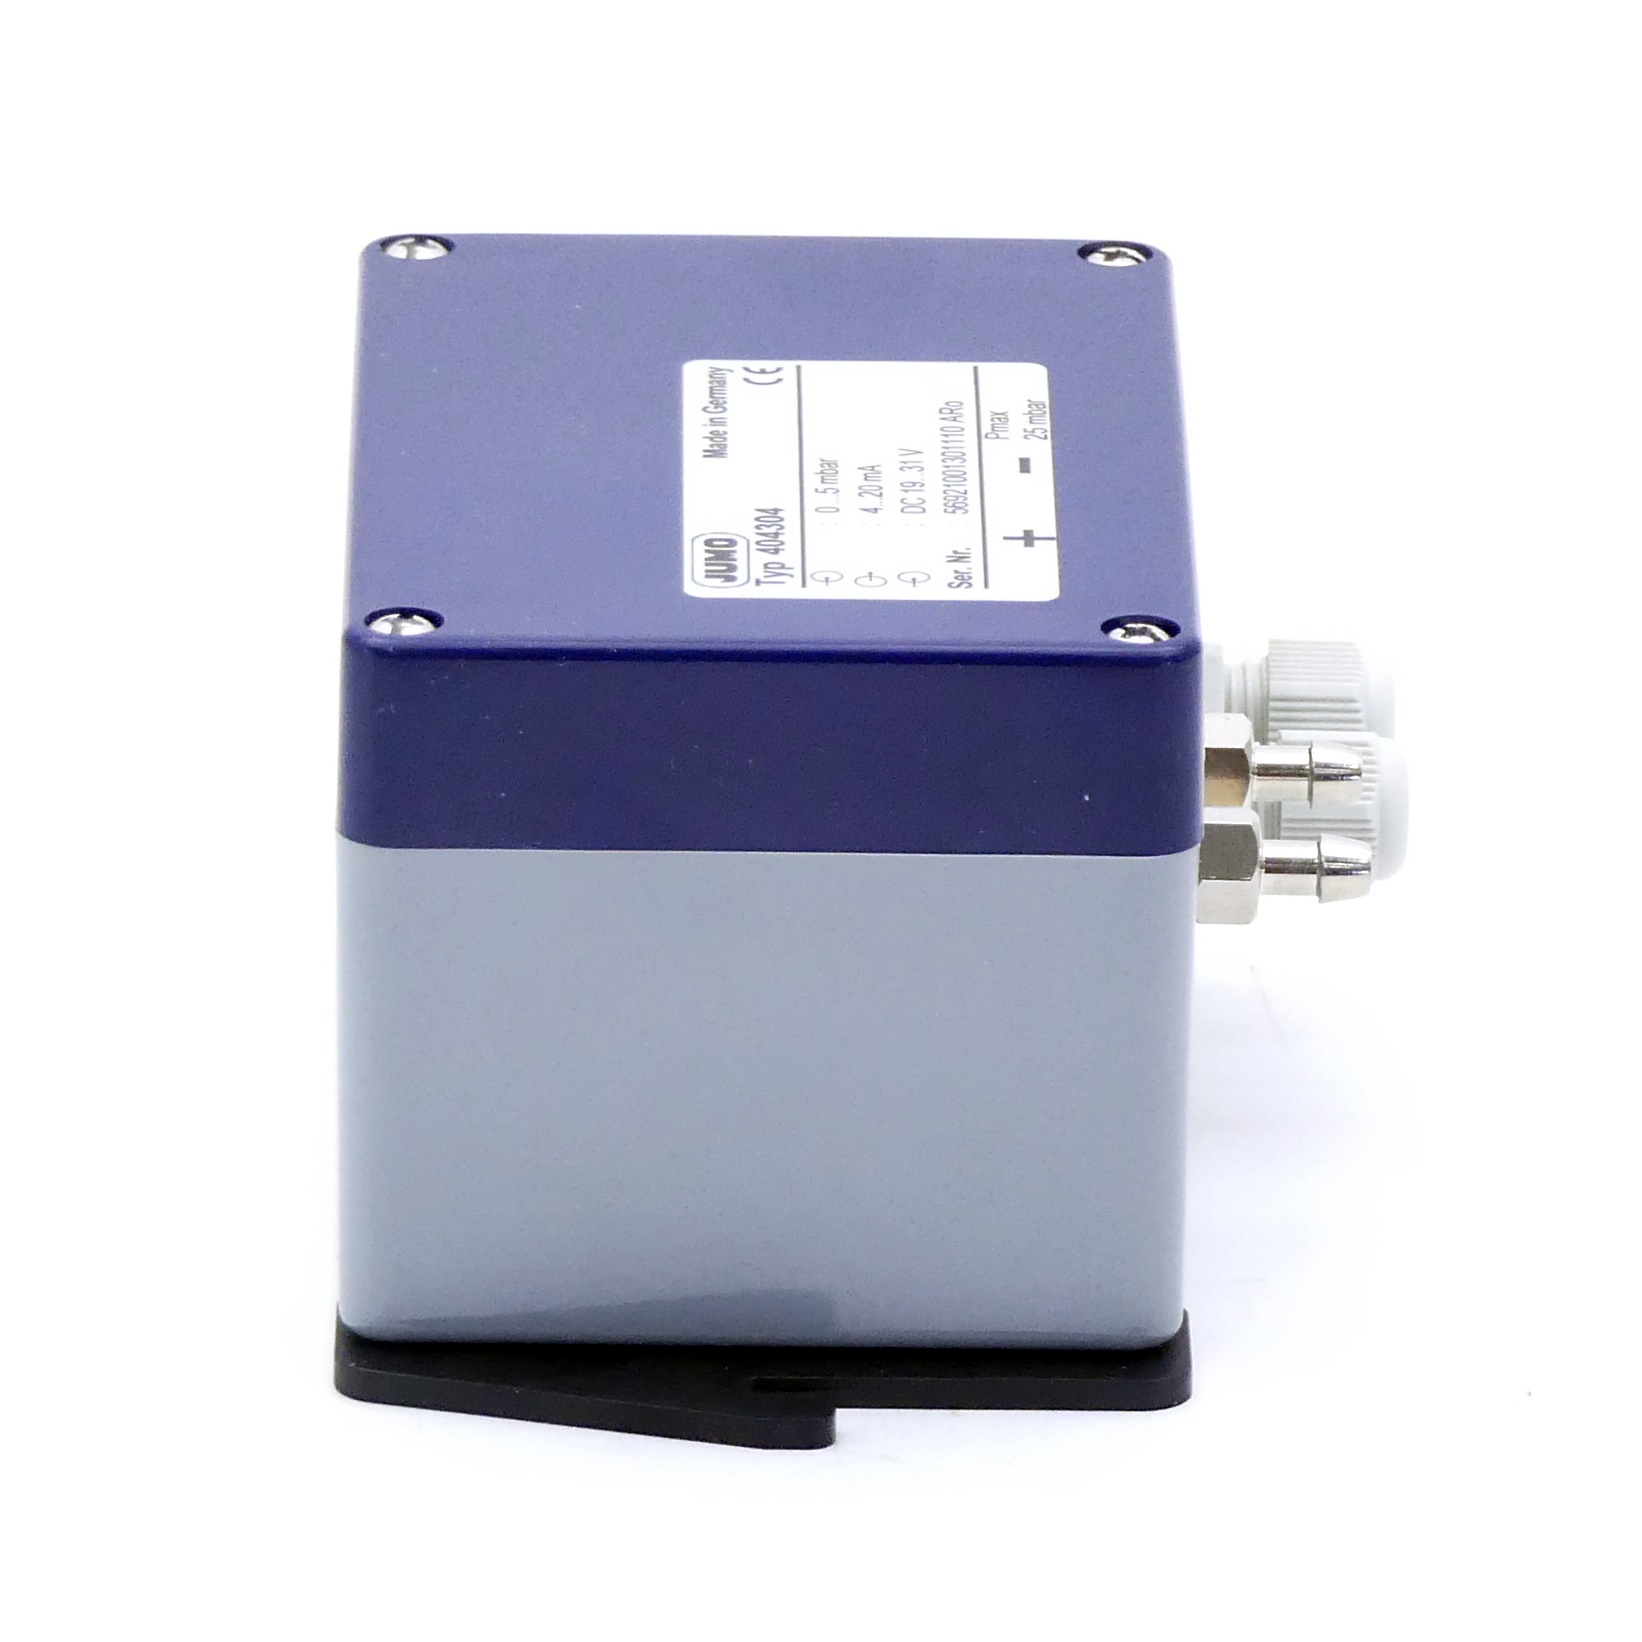 Pressure and differential pressure transmitter 